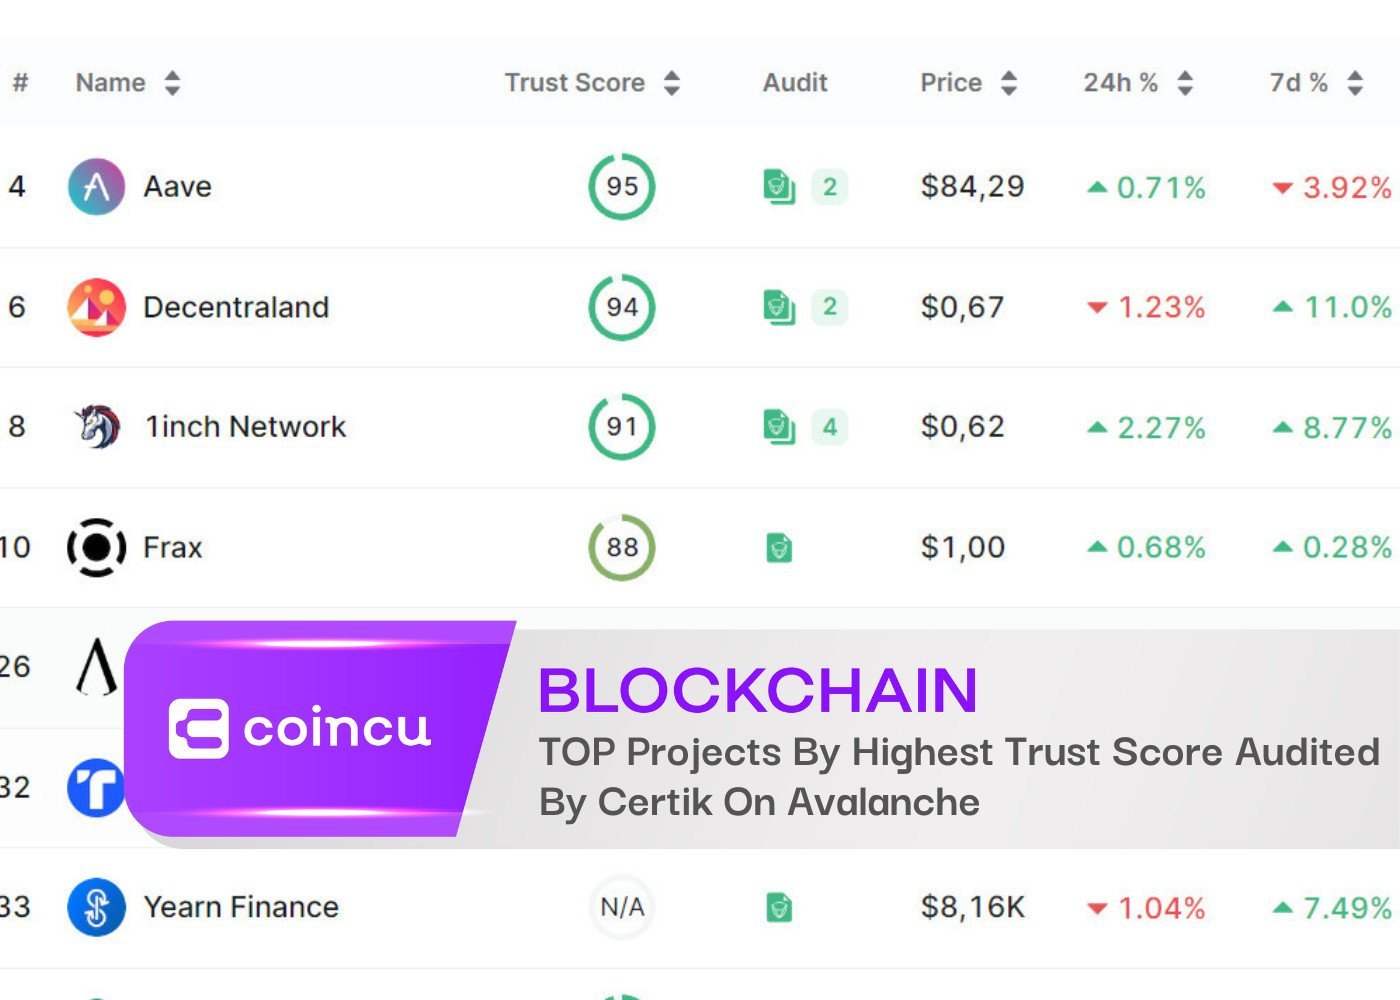 TOP Projects By Highest Trust Score Audited By Certik DeFi On Avalanche